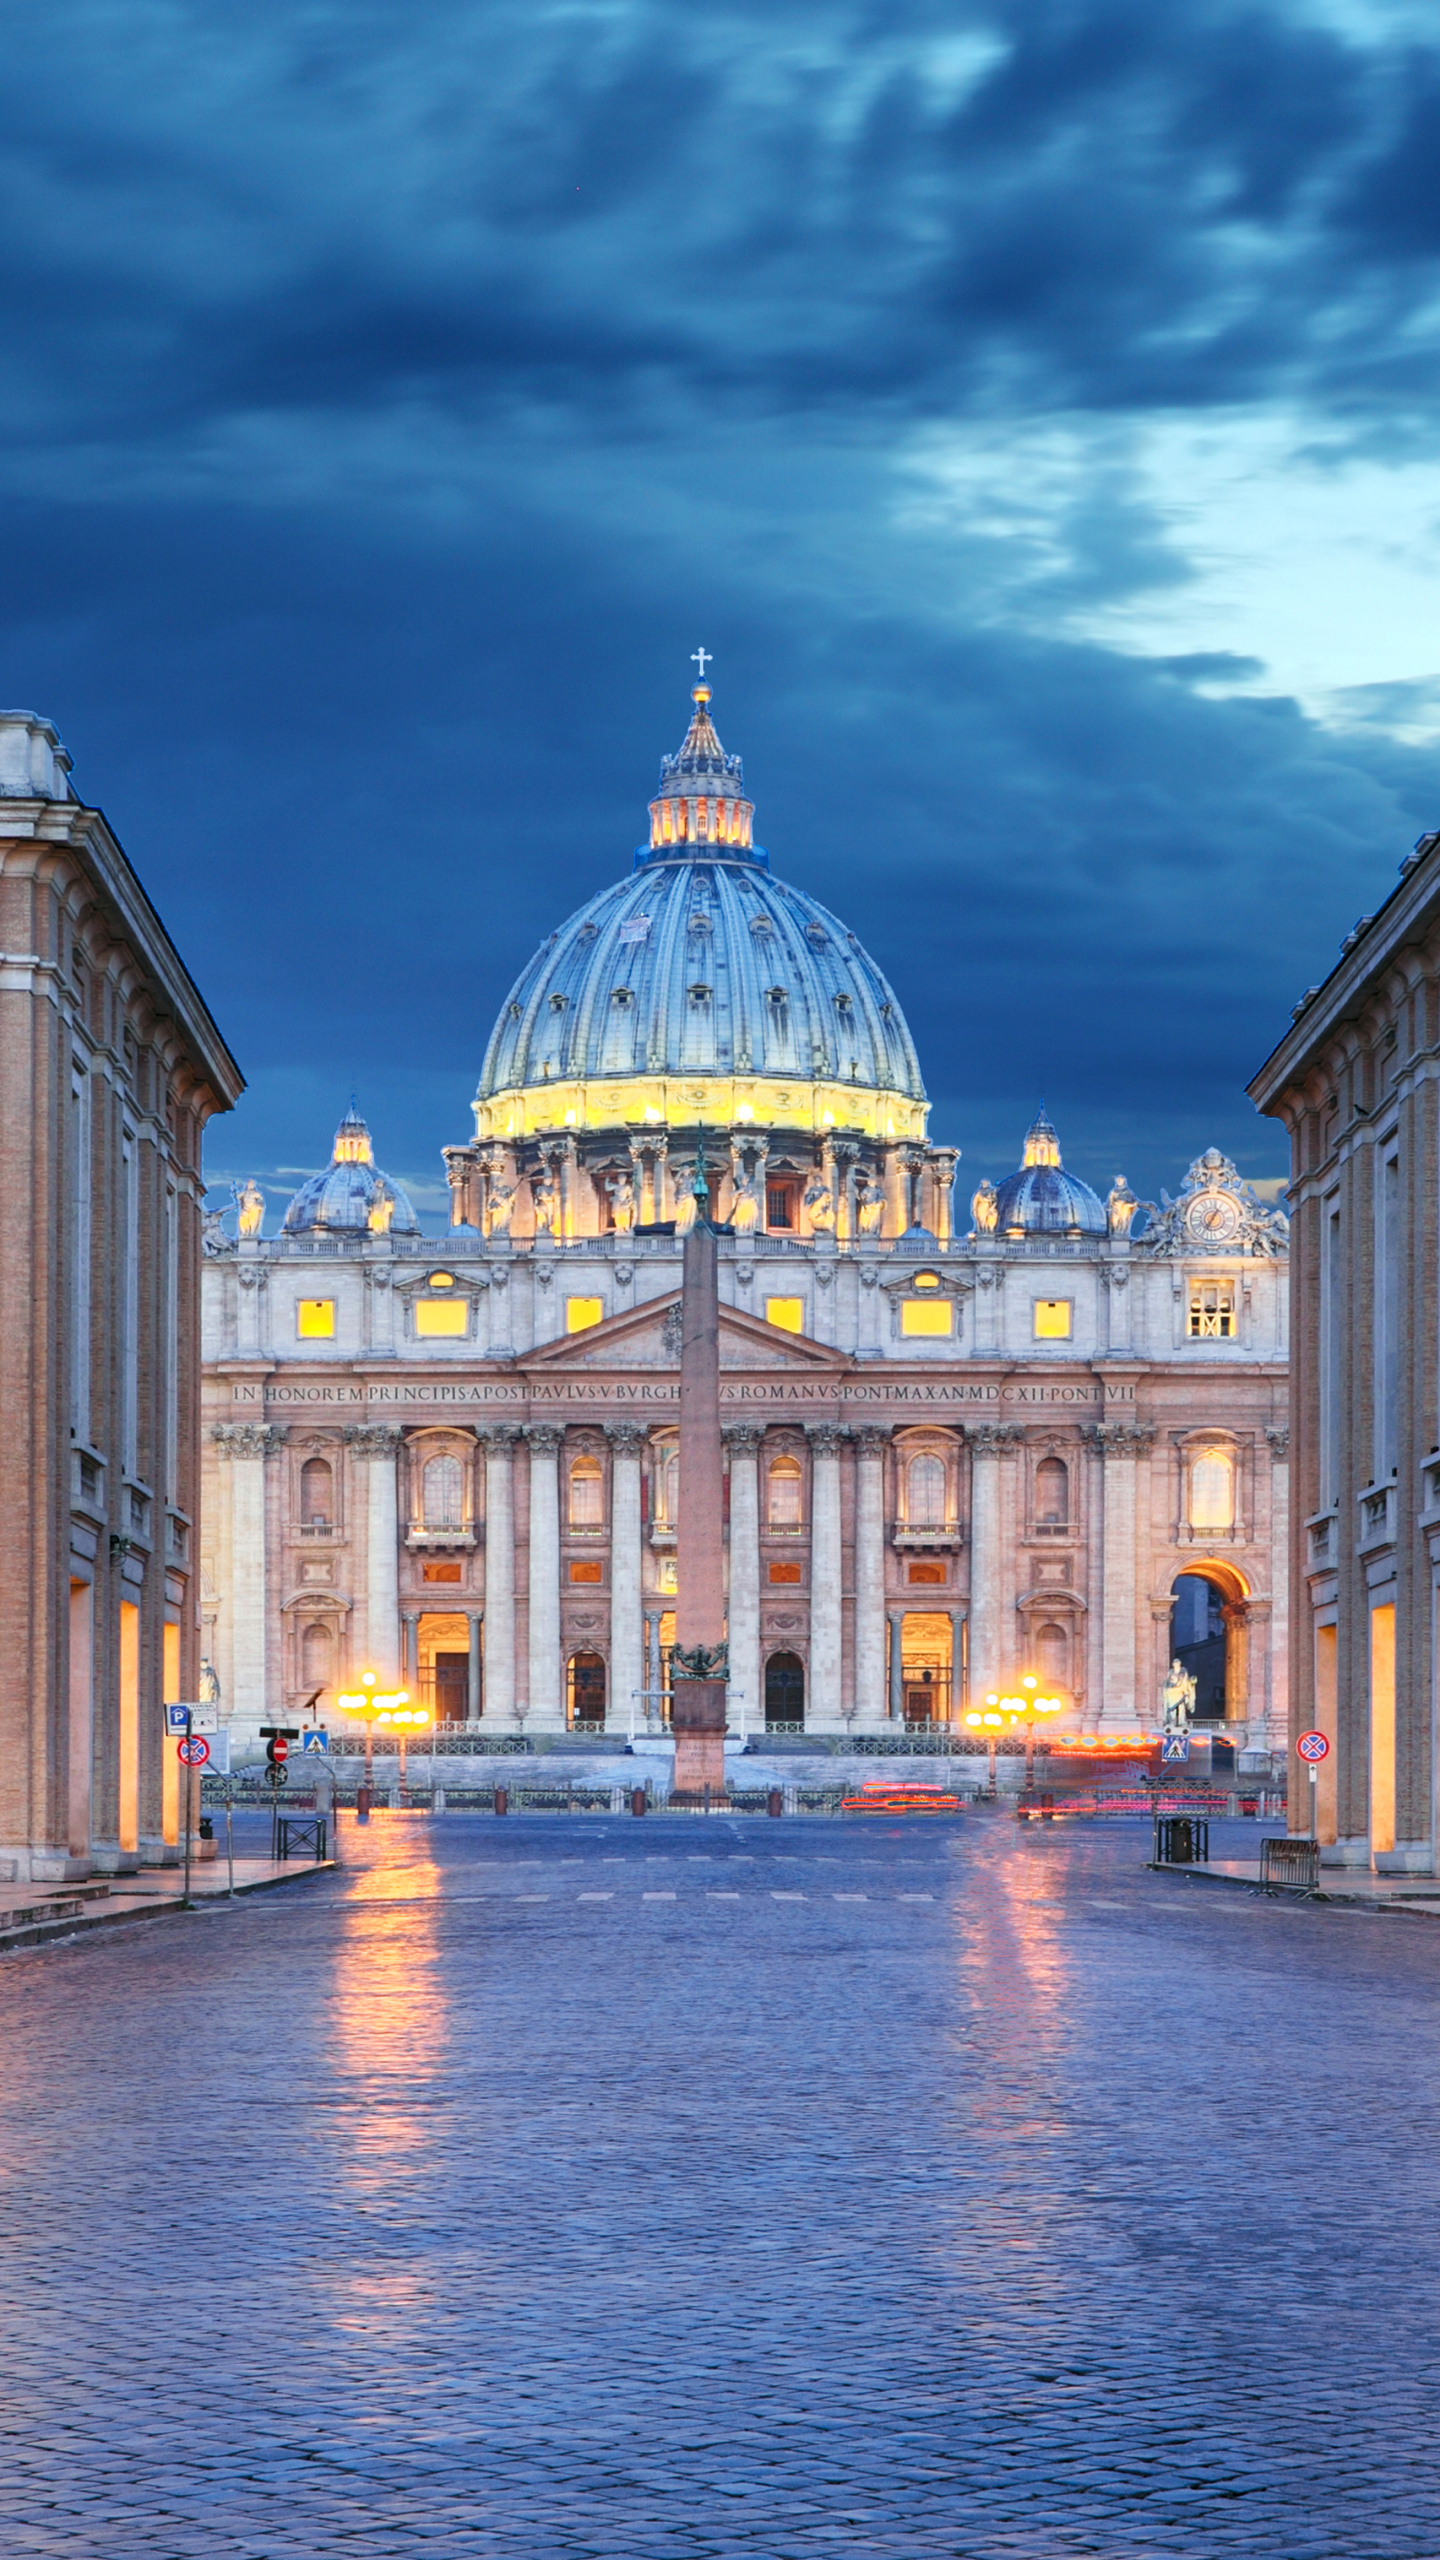 Download wallpapers Saint Peters Basilica Vatican evening city lights  St Peters Square Italy Rome for desktop with resolution 2880x1800 High  Quality HD pictures wallpapers